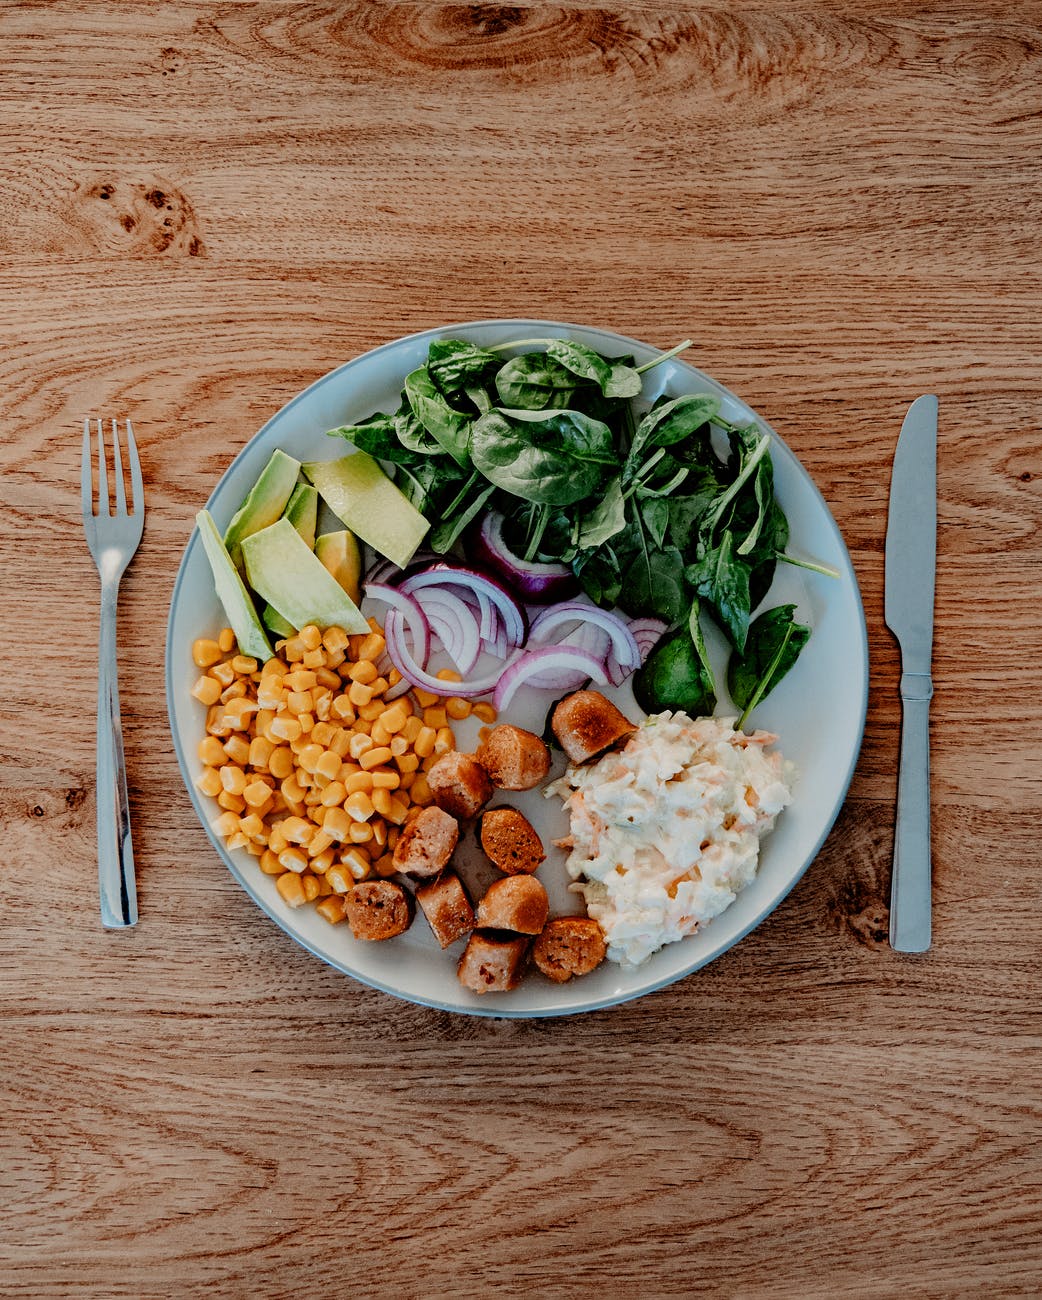 Read more about the article Moderation, variety, and balance on your plate.